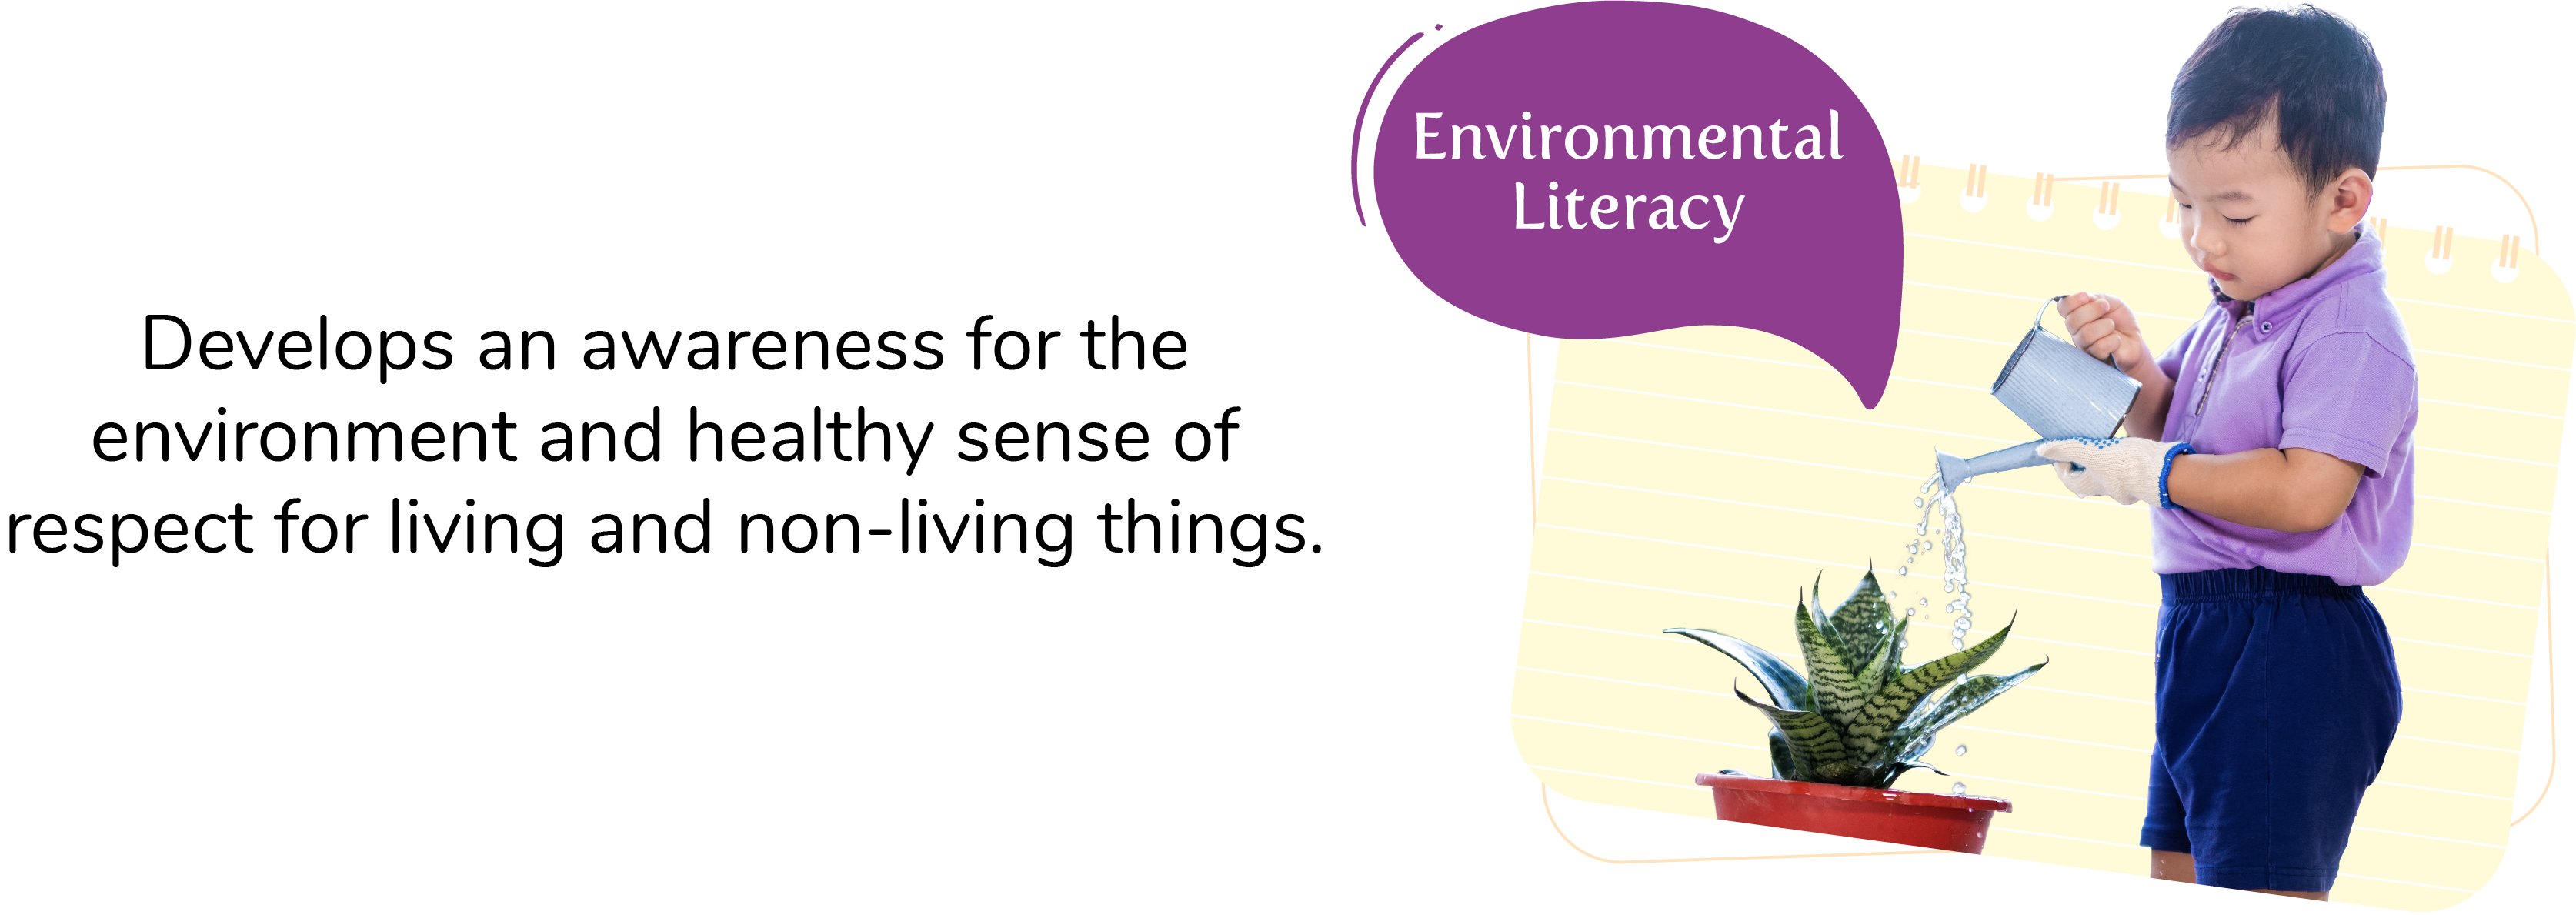 Develops an awareness for the environment and healthy sense of respect for living and non-living things.